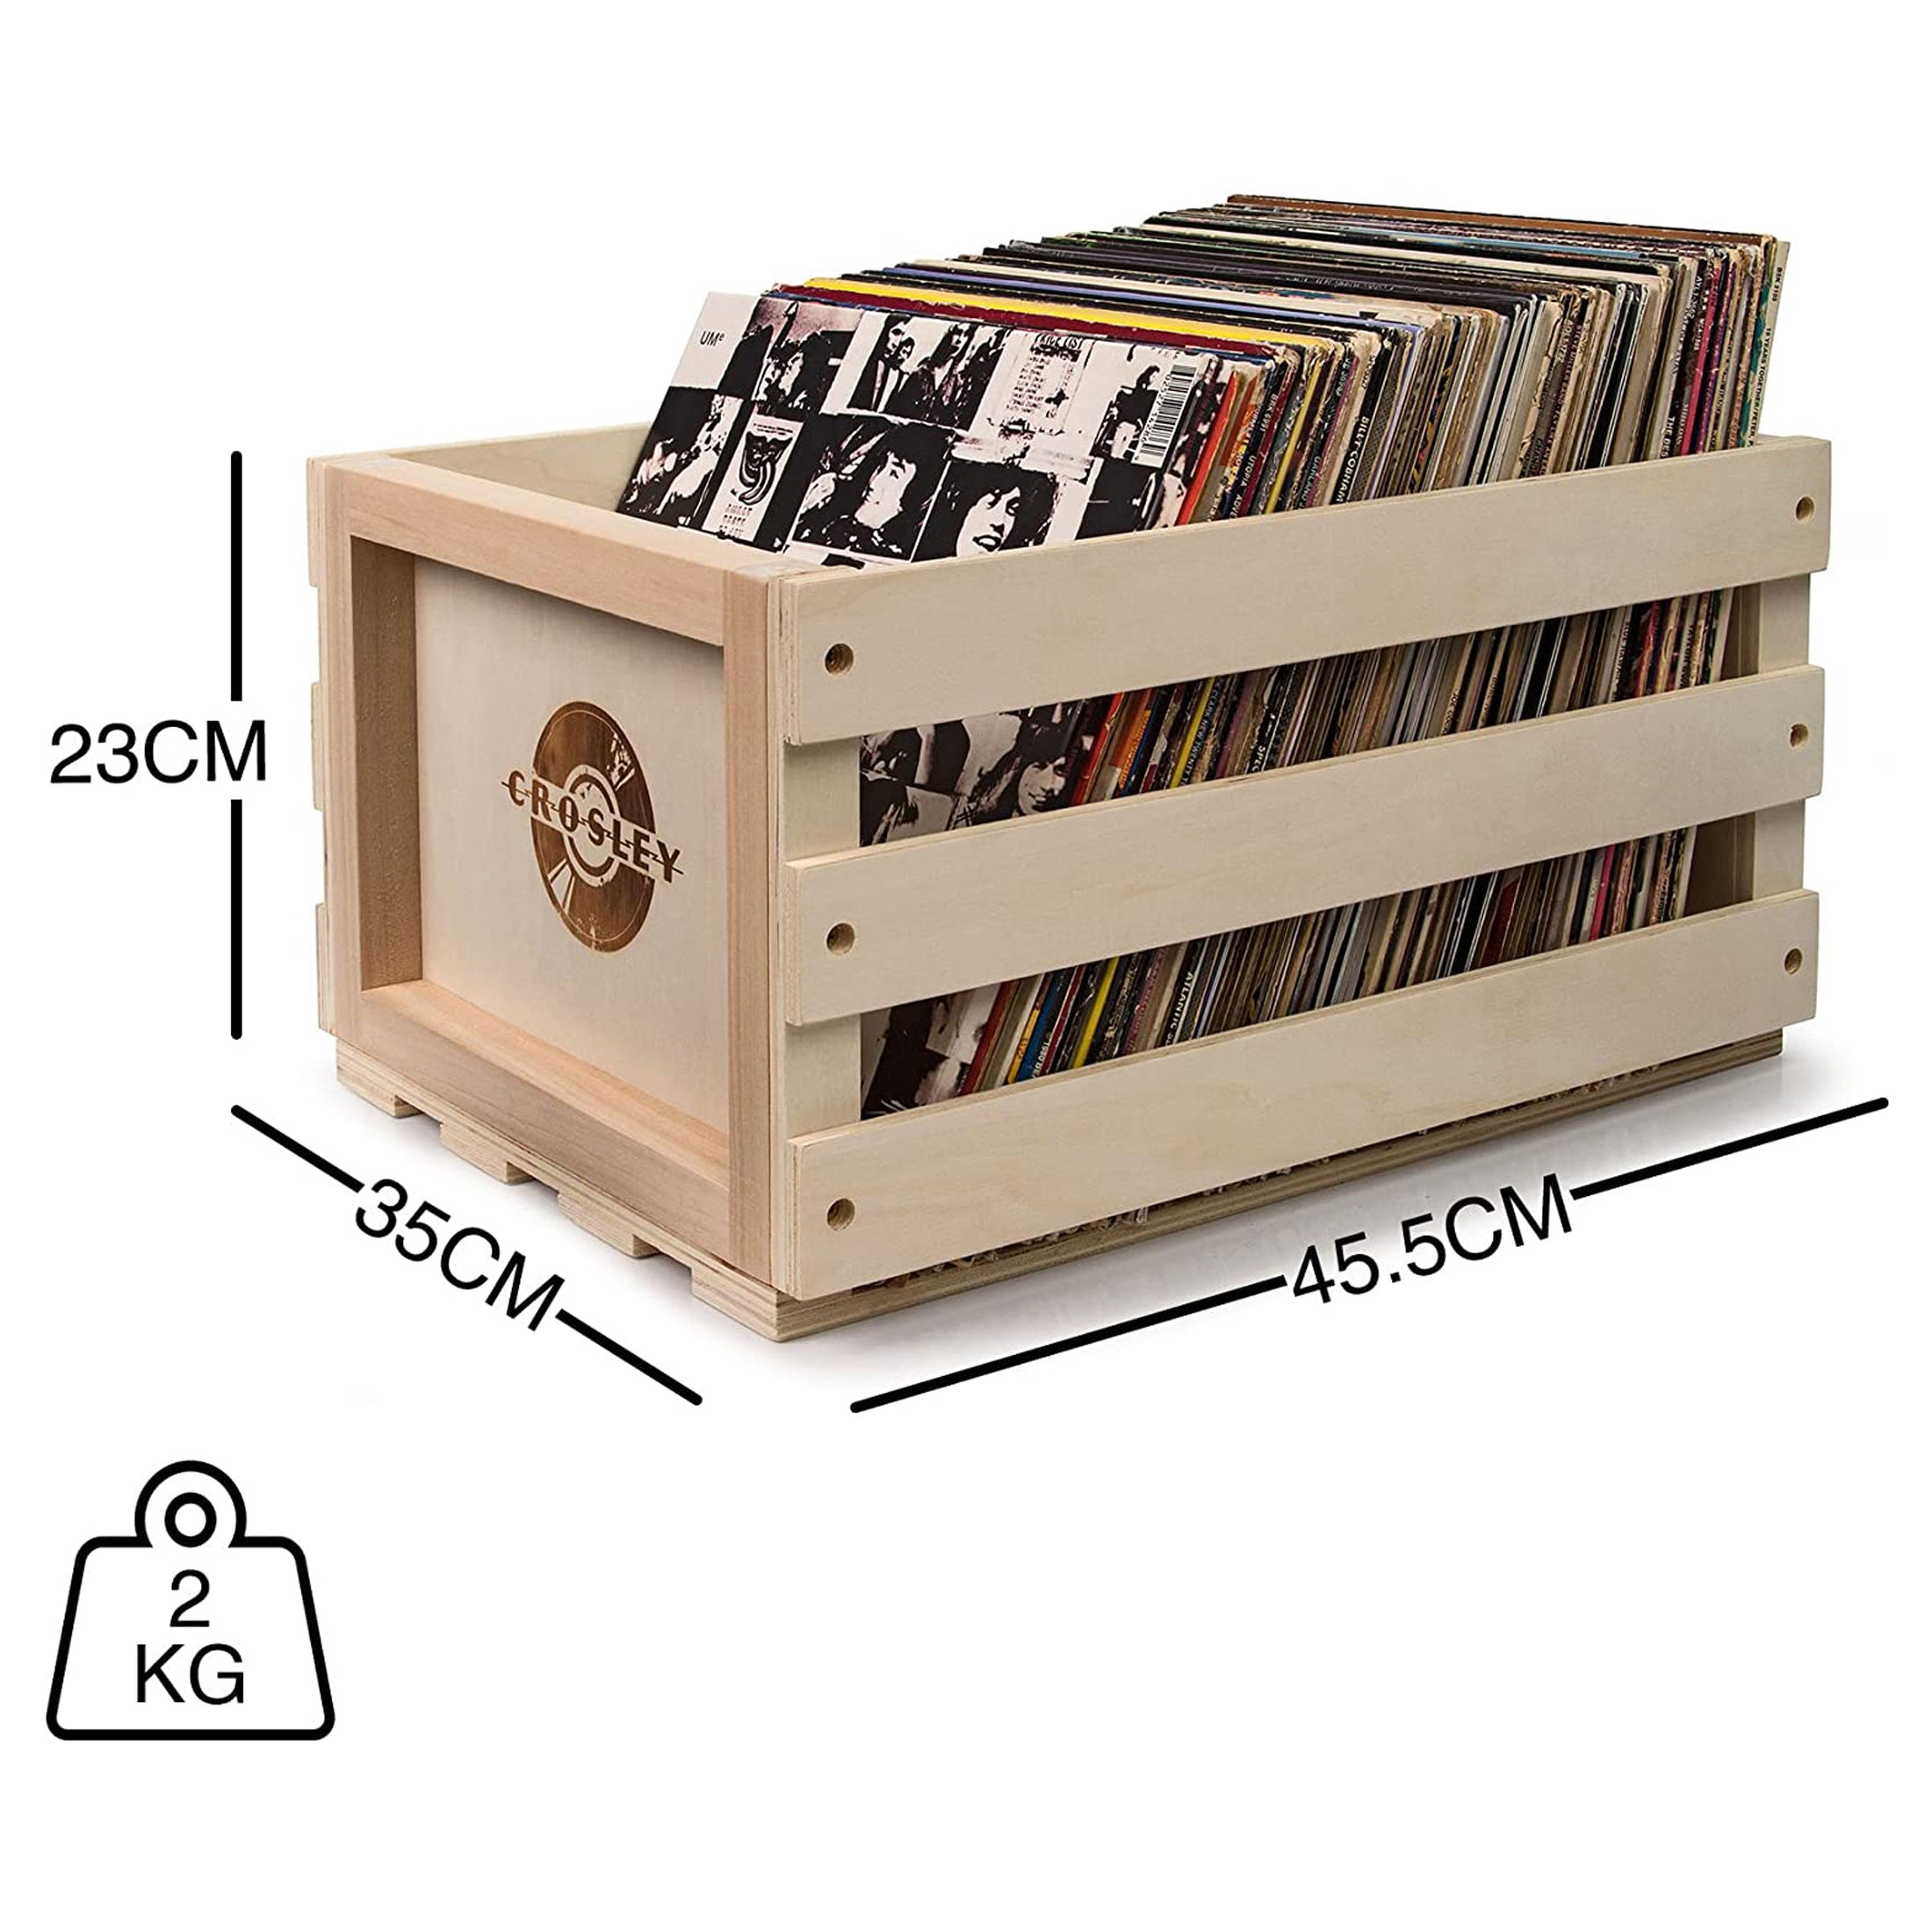 Rustic Wooden Vinyl Record Storage Crate Holds 75 LPs Crosley